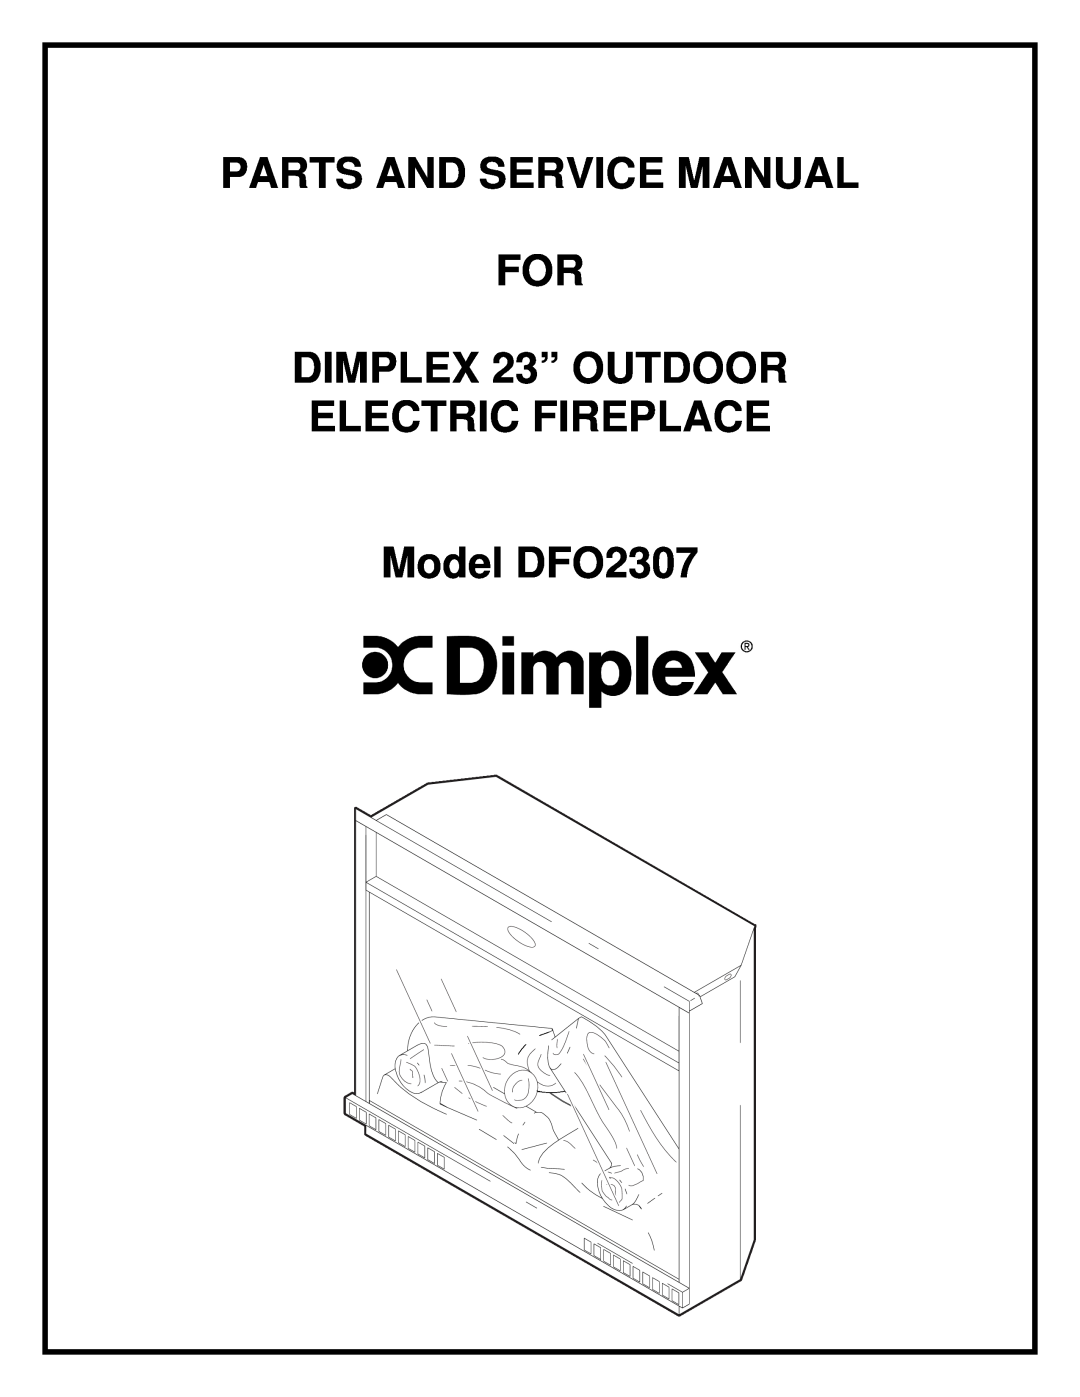 Dimplex DFOR2307, DFO2307 manual Practical User’S Guide, FOR THE DIMPLEX 23” OUT DOOR ELECTRIC FIREPLACE 